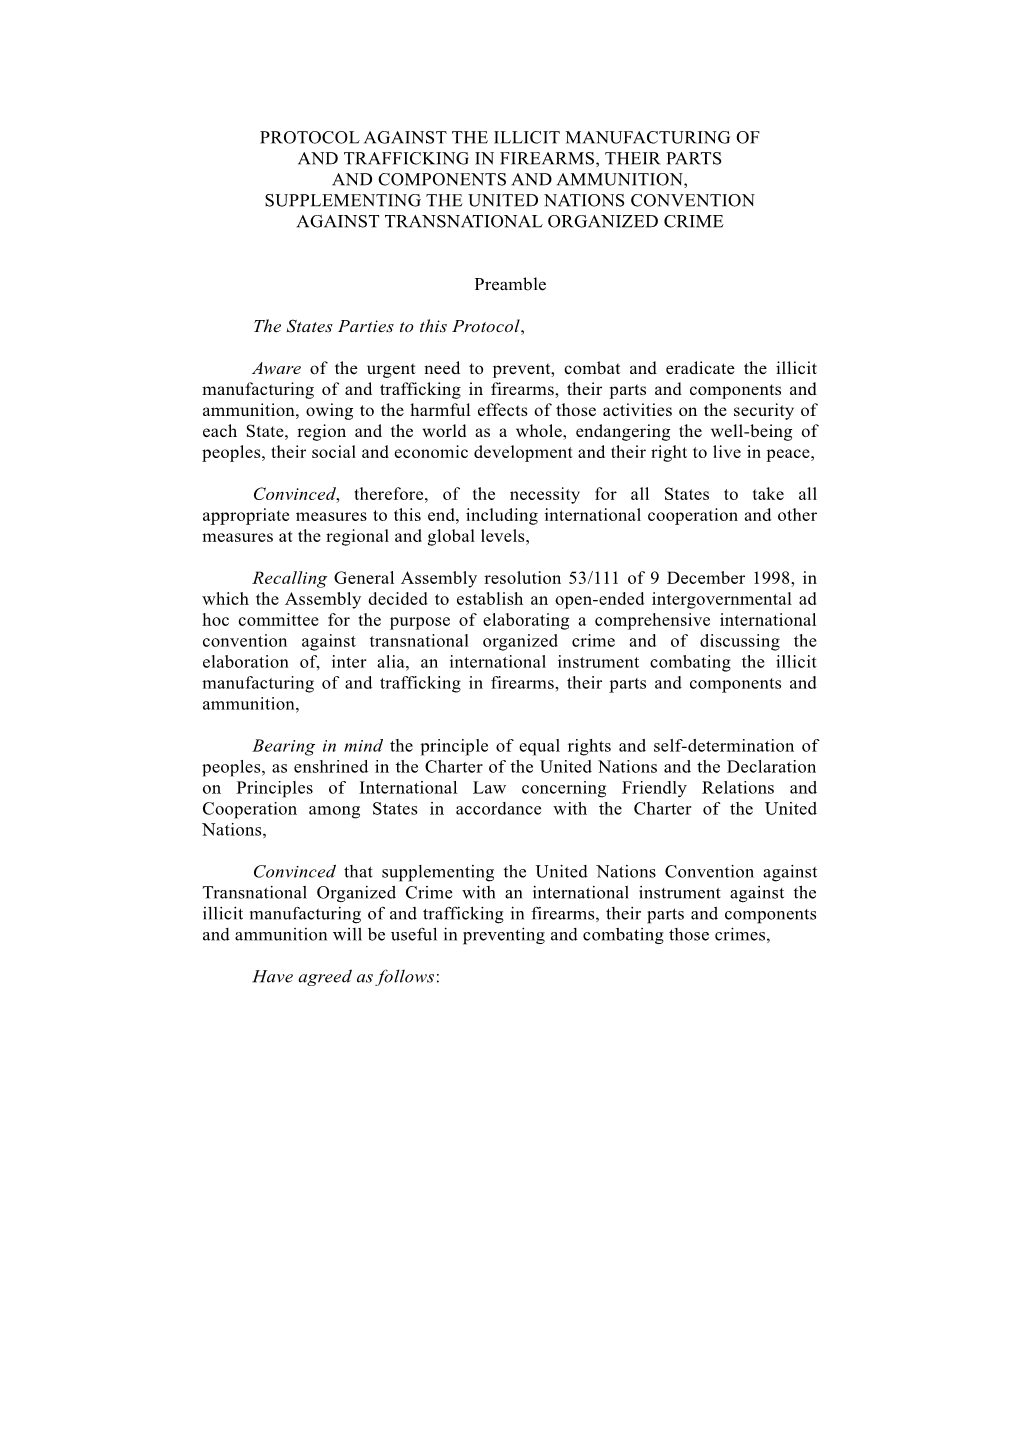 Protocol Against the Illicit Manufacturing and Trafficking in Firearms, Their Parts And